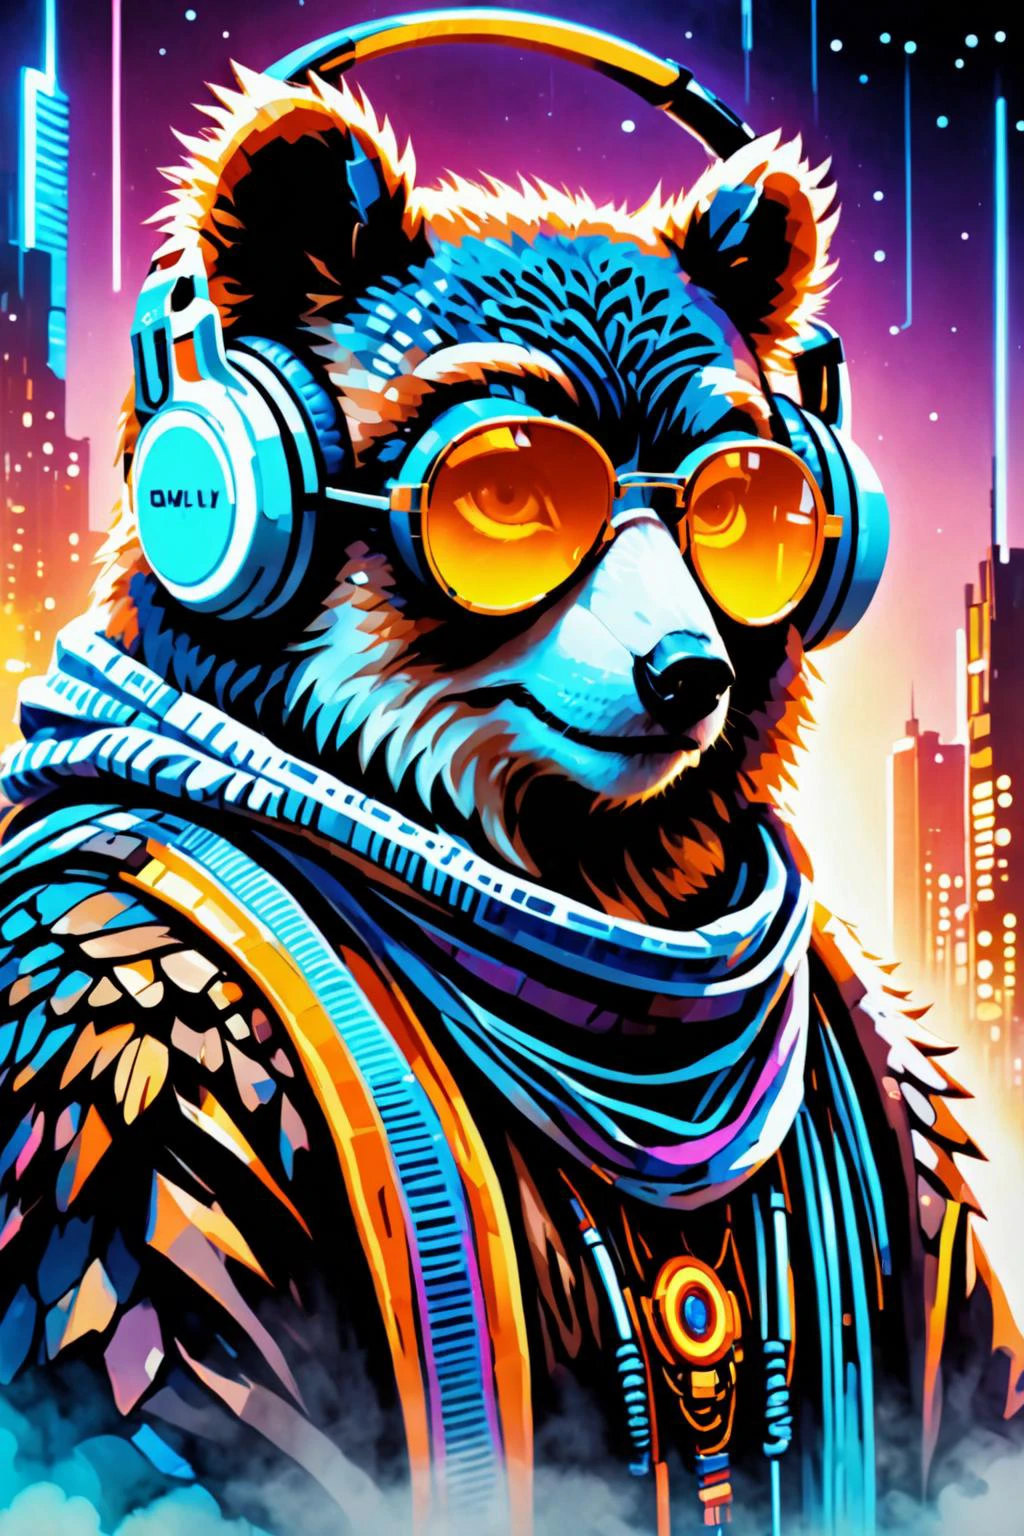 retro ink, image style is Rembrandt Lighting and cinematic lighting Mosaic/Pixelation , , sci-fi , science fiction with fluid detail in the style of Chris Foss  ,,  neon Brown,navy blue ,  ((portrait of a Owlbear)), wearing sunglasses, wearing headphones and a scarf, background is a white room with 2 meters deep-fantasy city lights, and the background is space with a white cat in the background, highly detailed, 8k, high resolution, rendered in Octane 